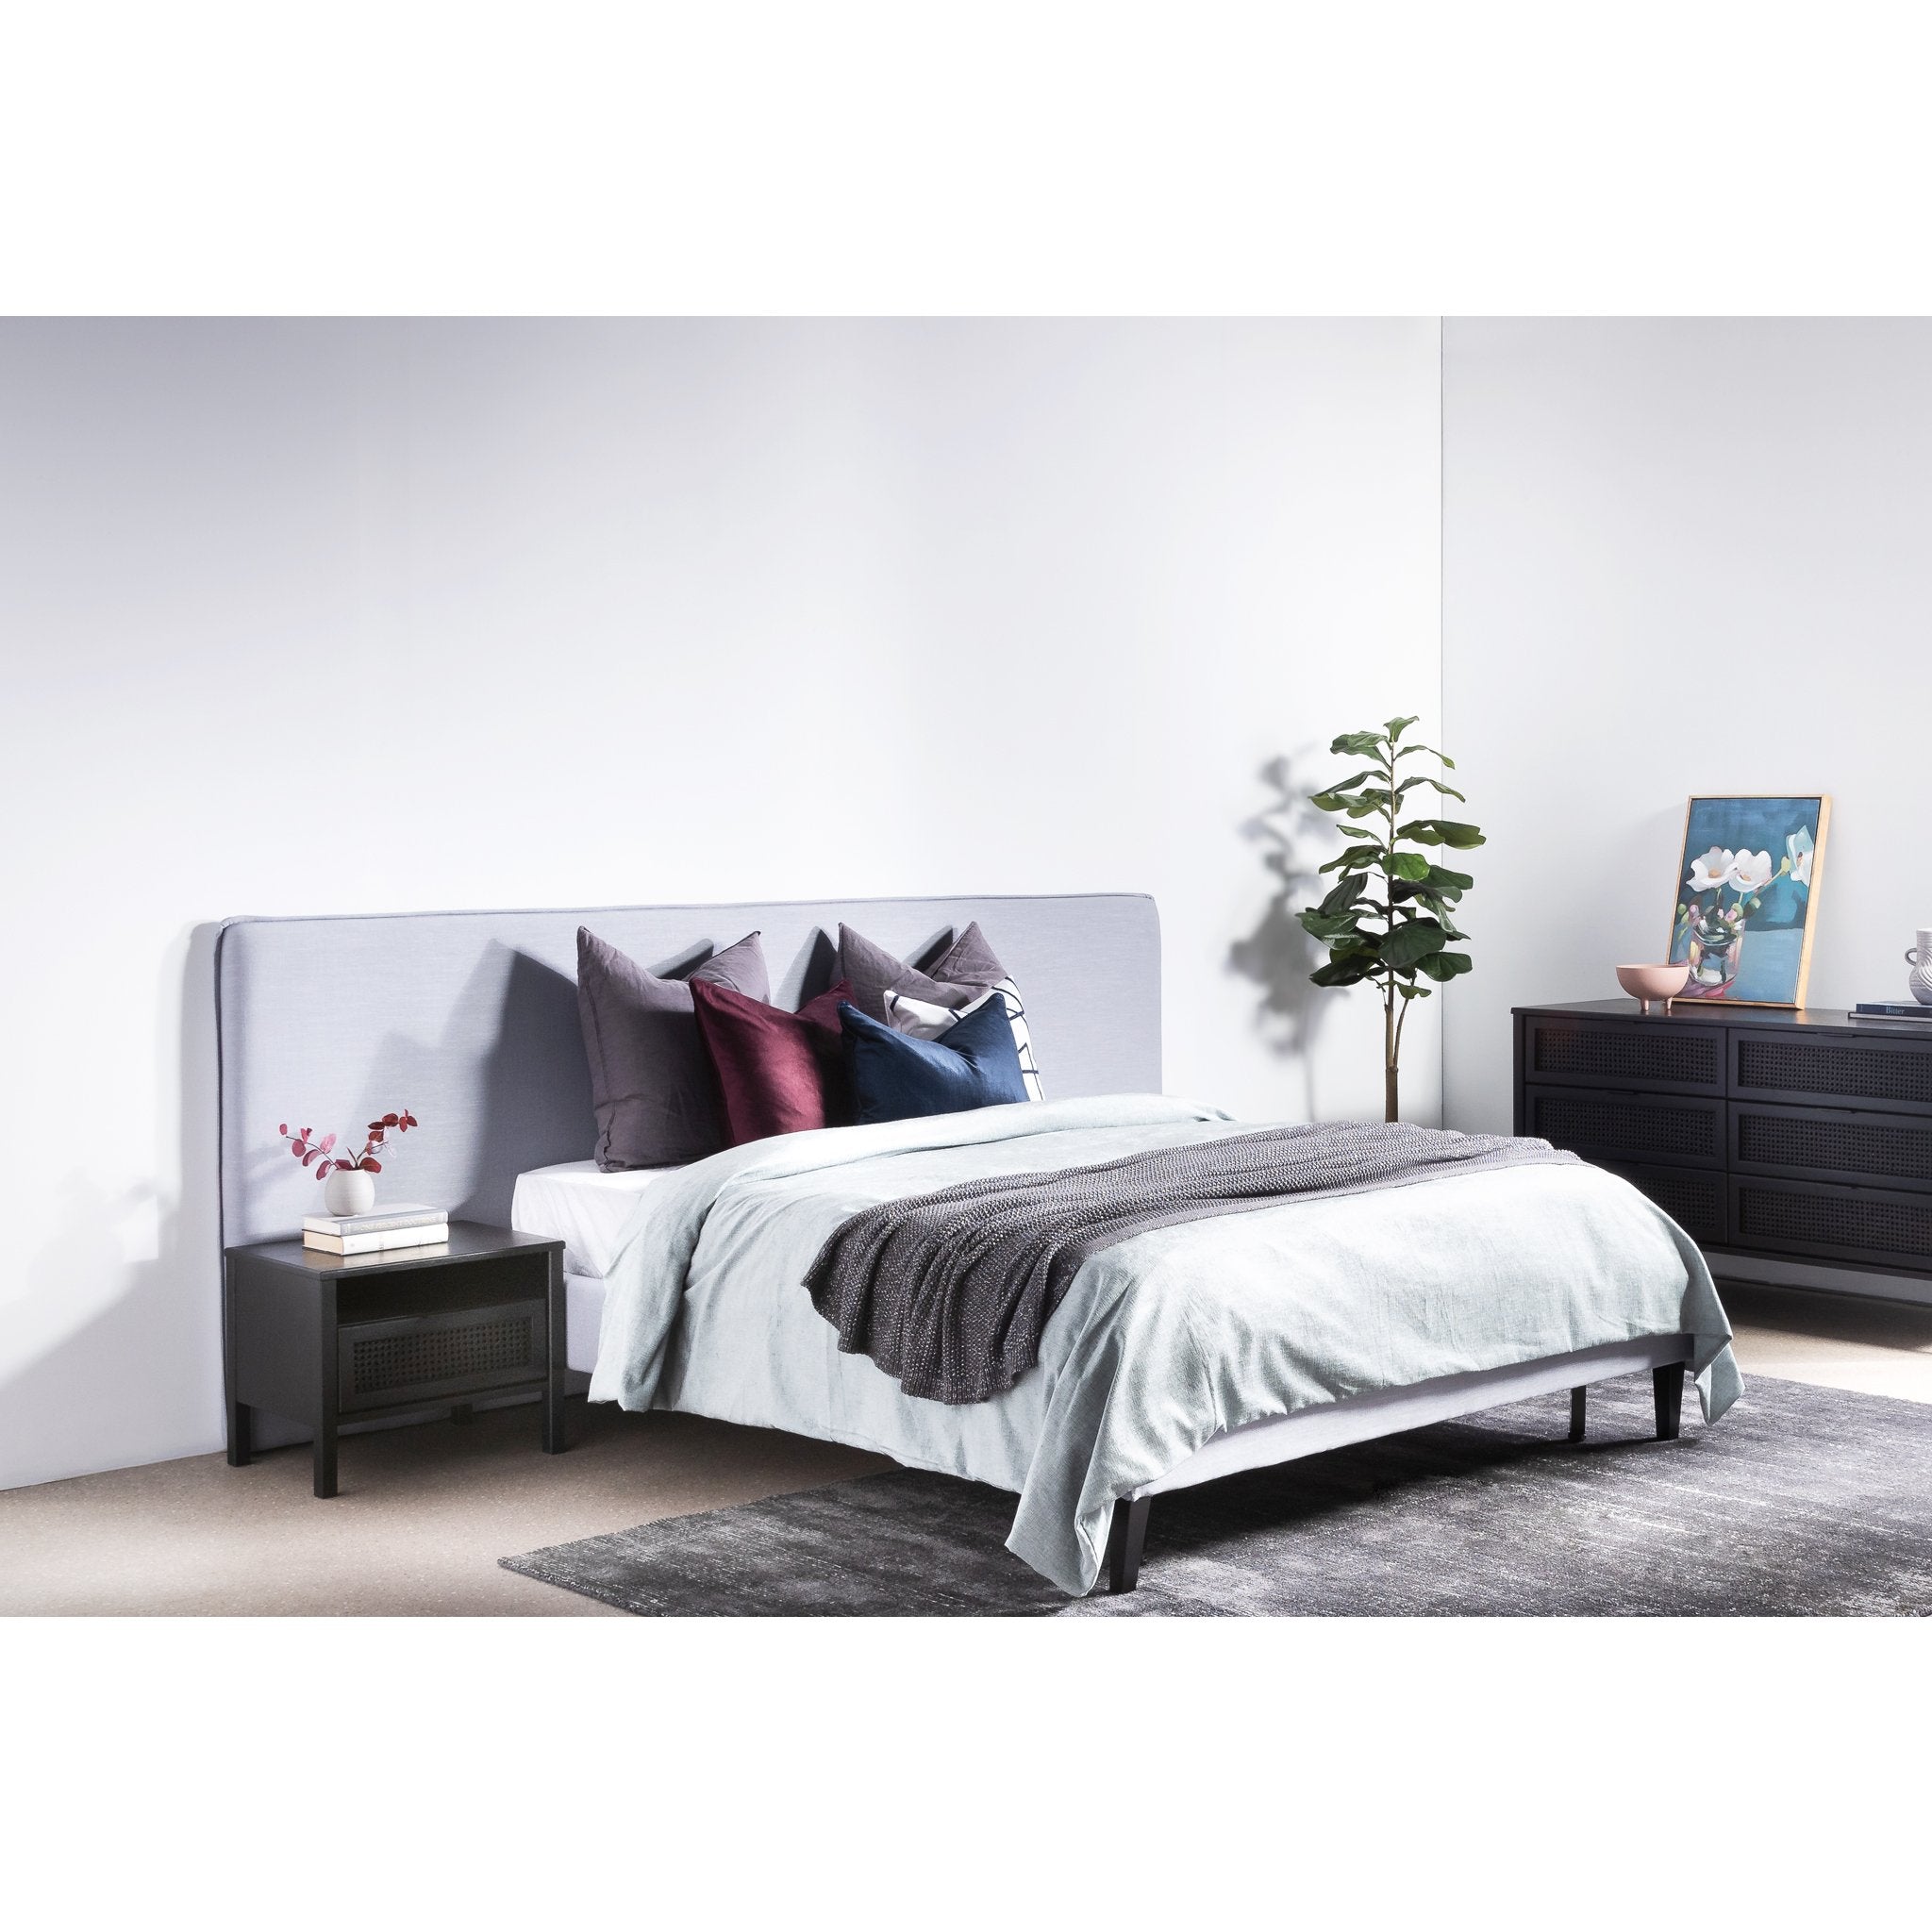 Oliver Fabric Wide King Bed Frame - Cement Grey - Beds